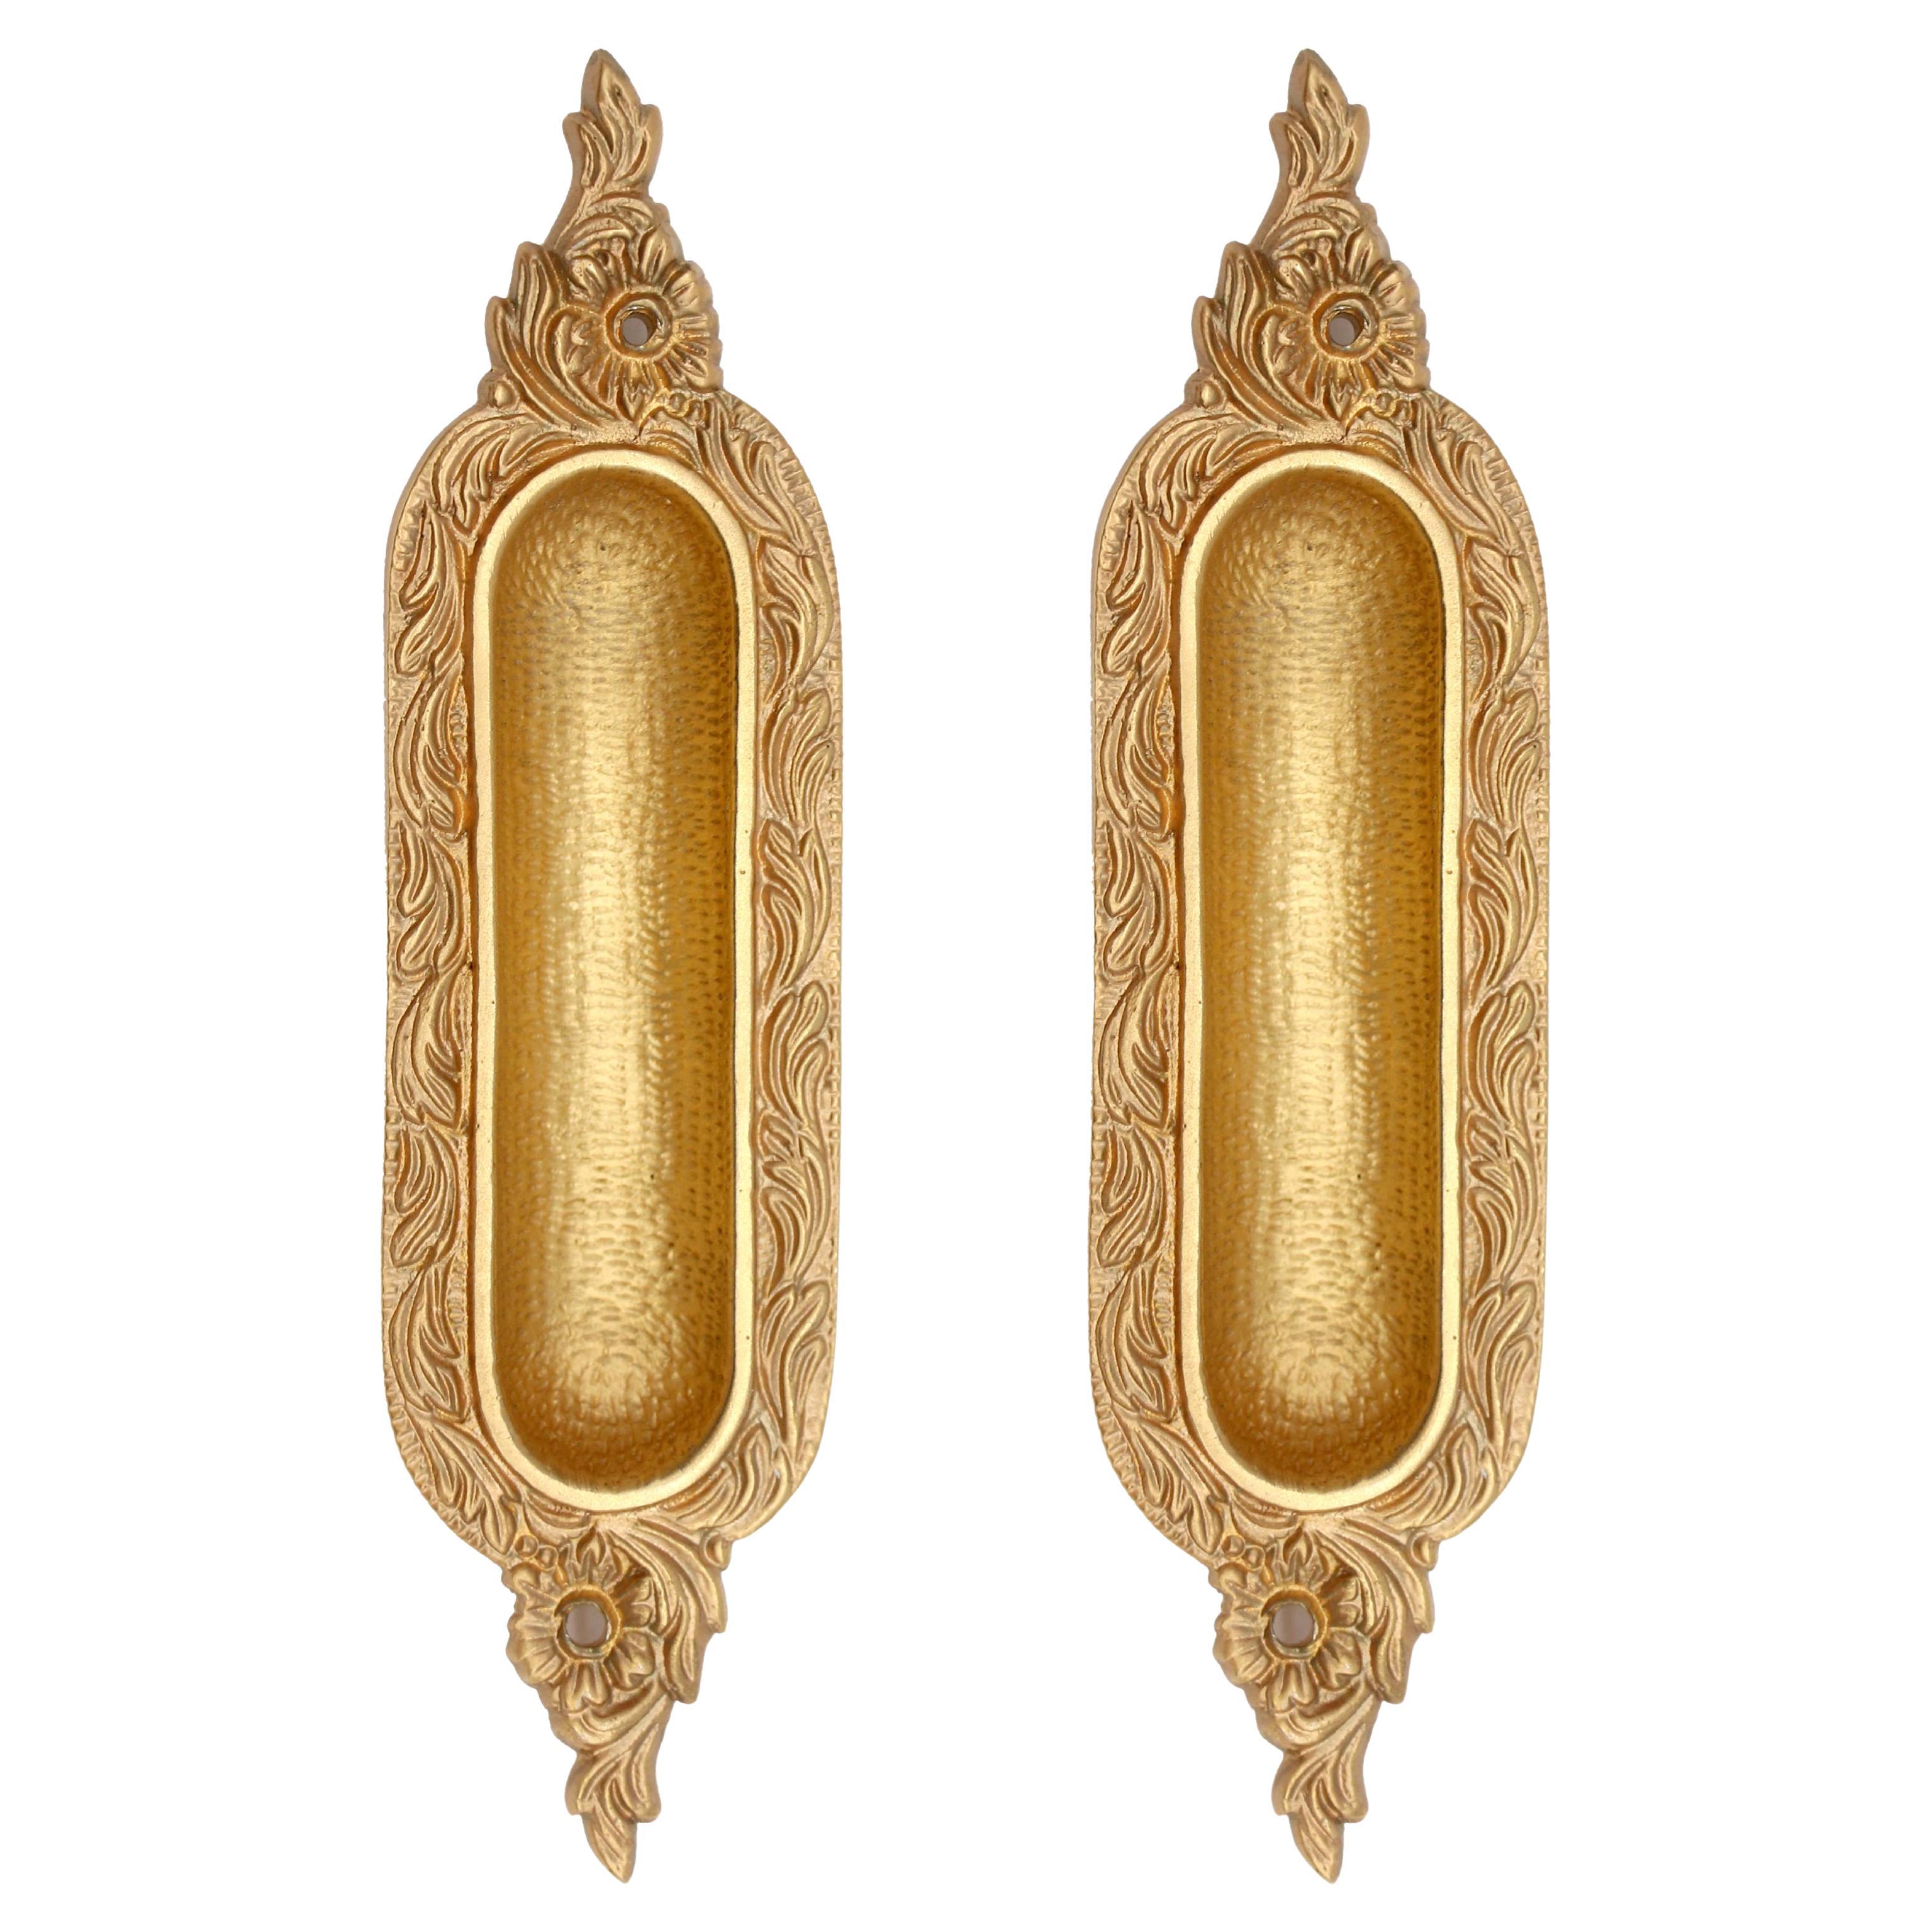 Pair of Italian Brass Pocket Door Pull Set by Salice Paolo with a Gold Finish